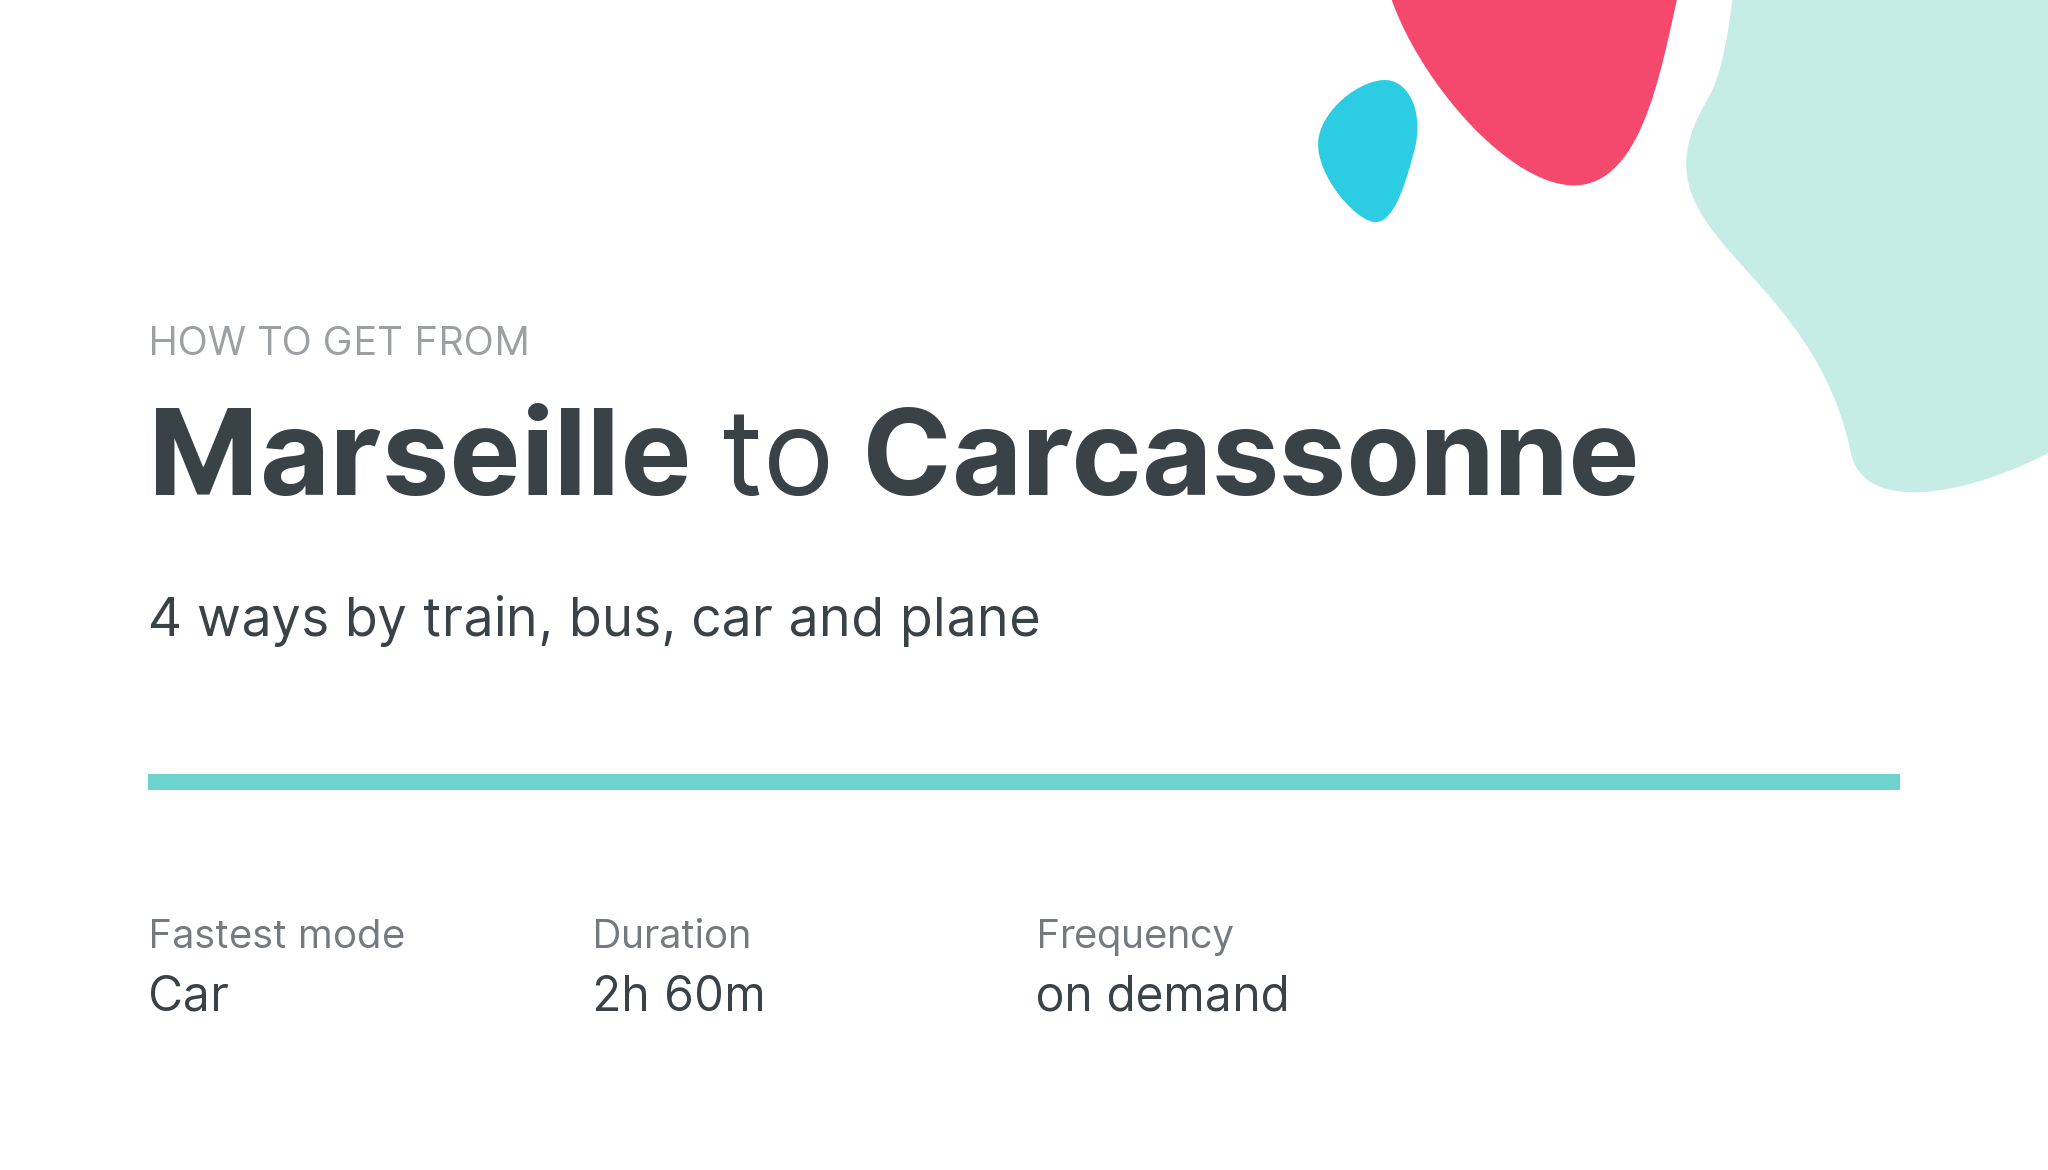 How do I get from Marseille to Carcassonne